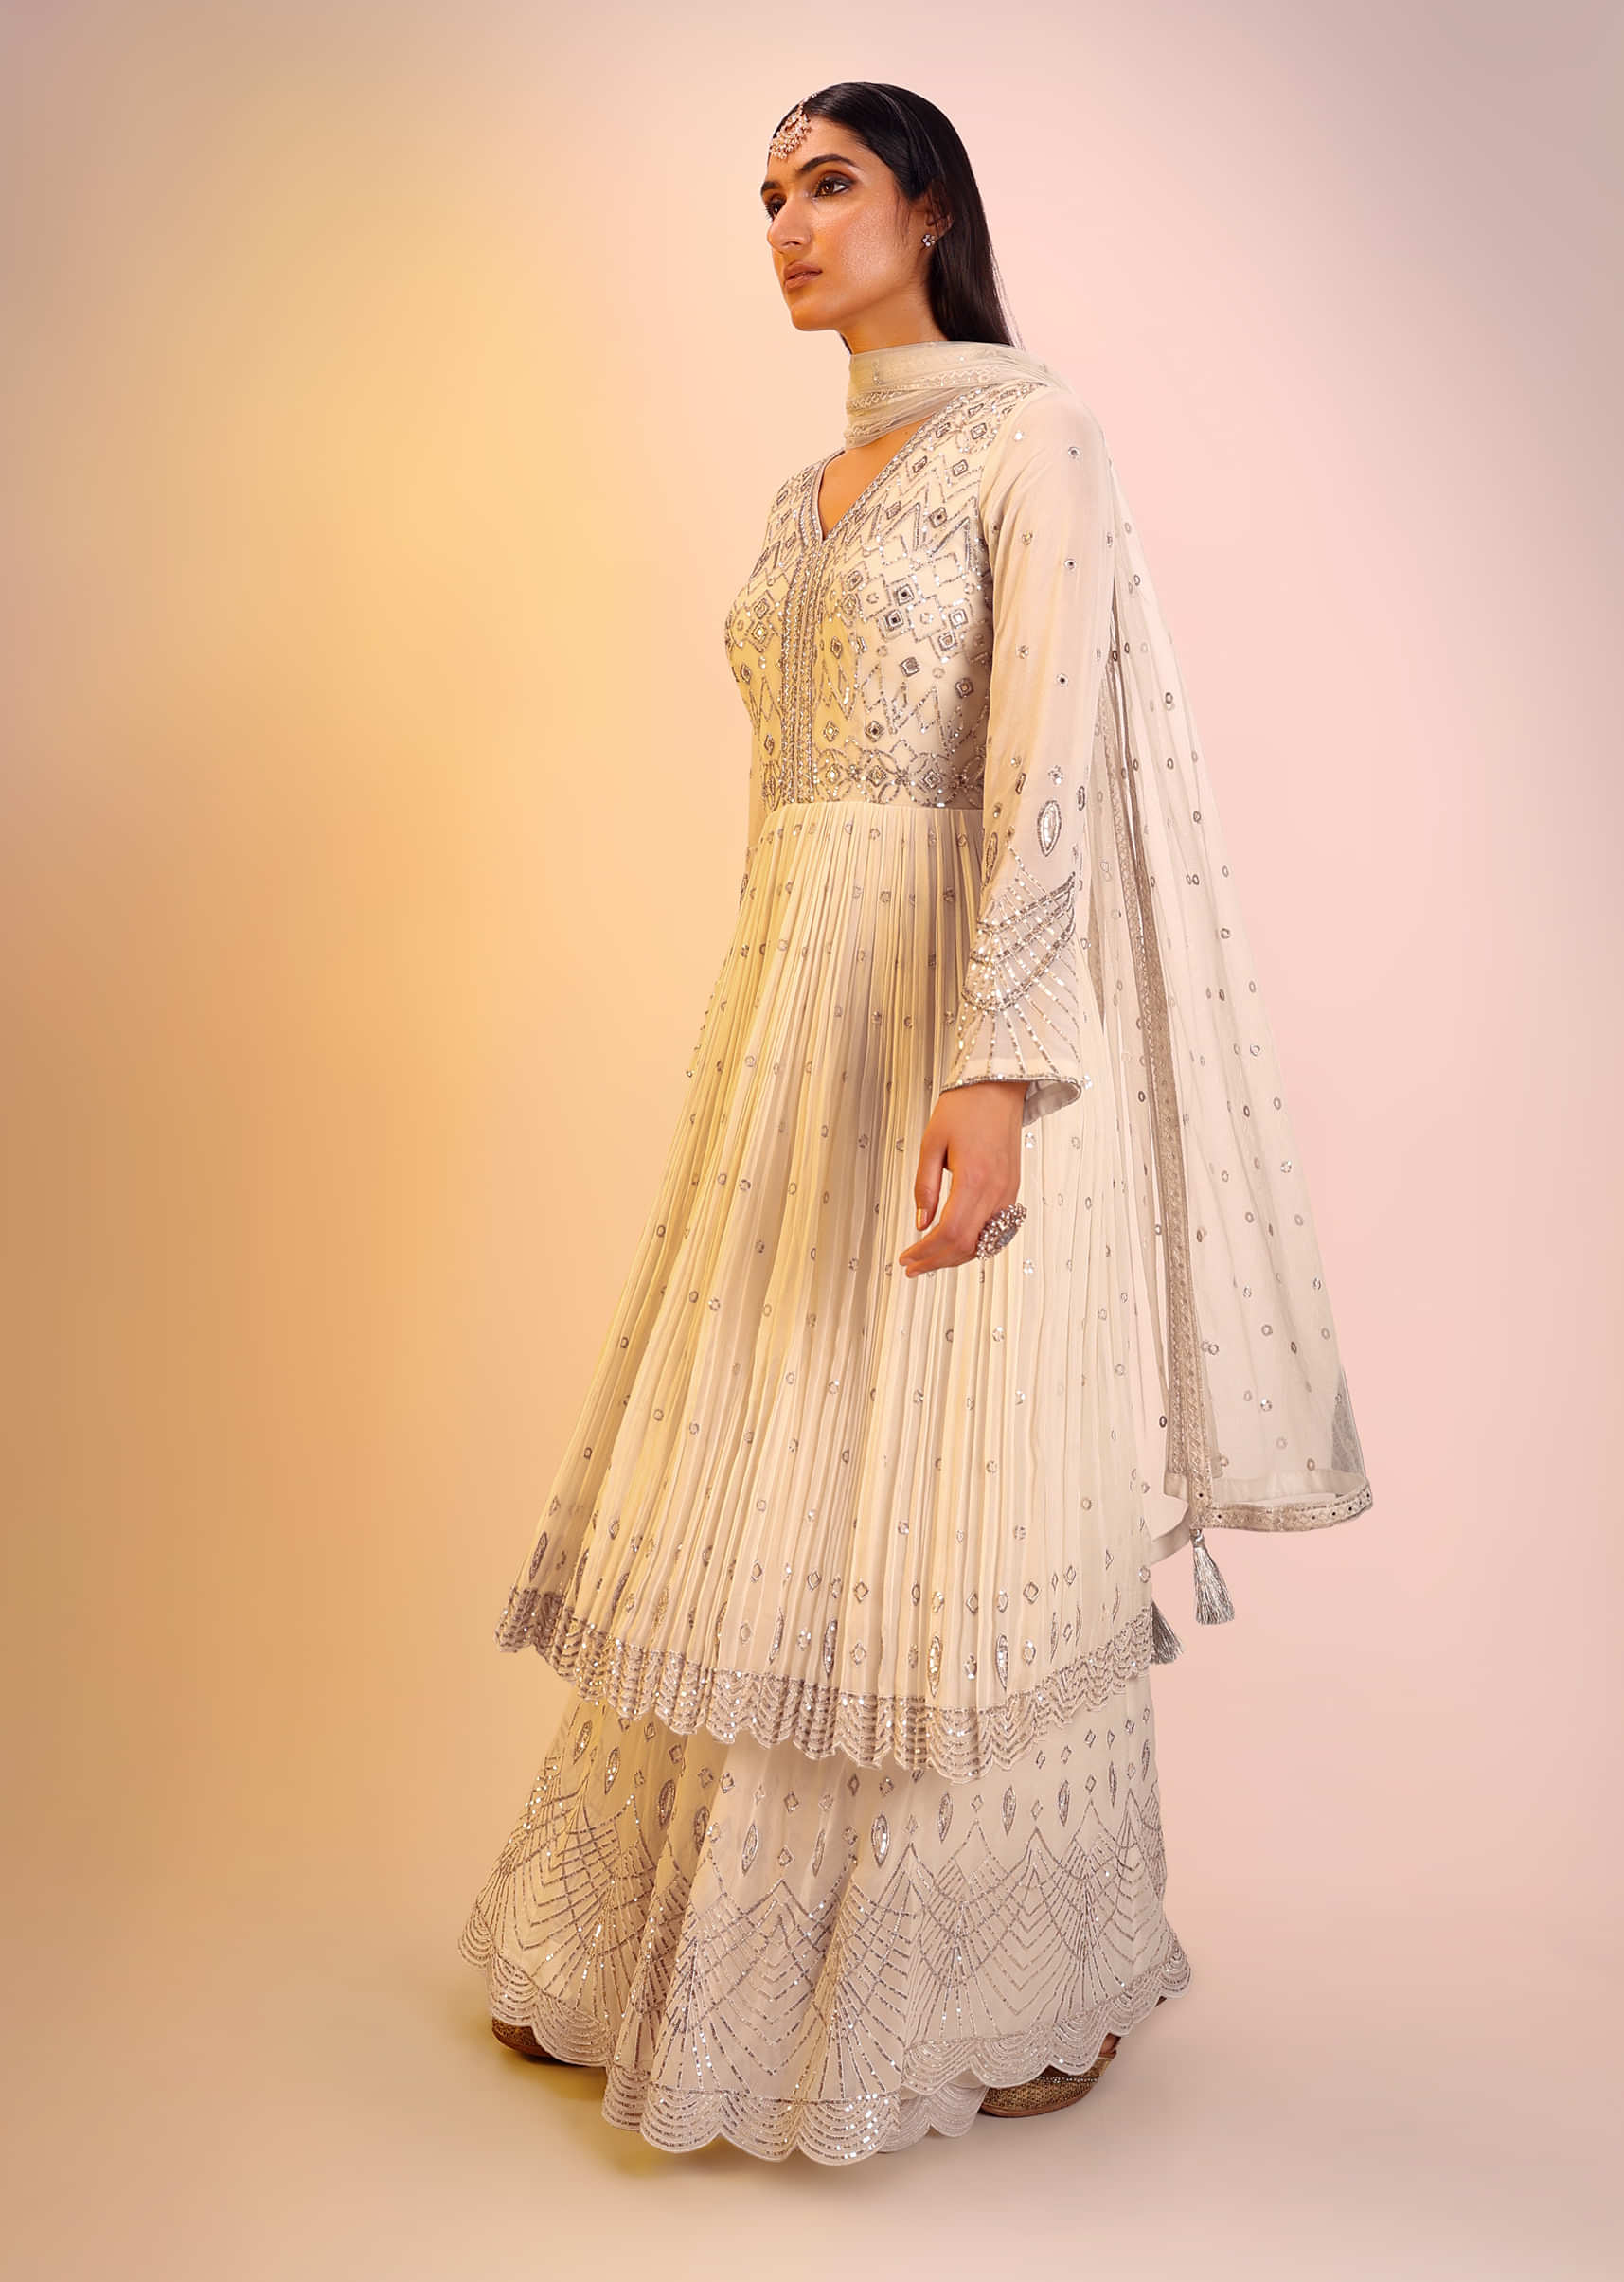 Off White Sharara Suit In Georgette With Sequins And Mirror Embroidered Geometric Design